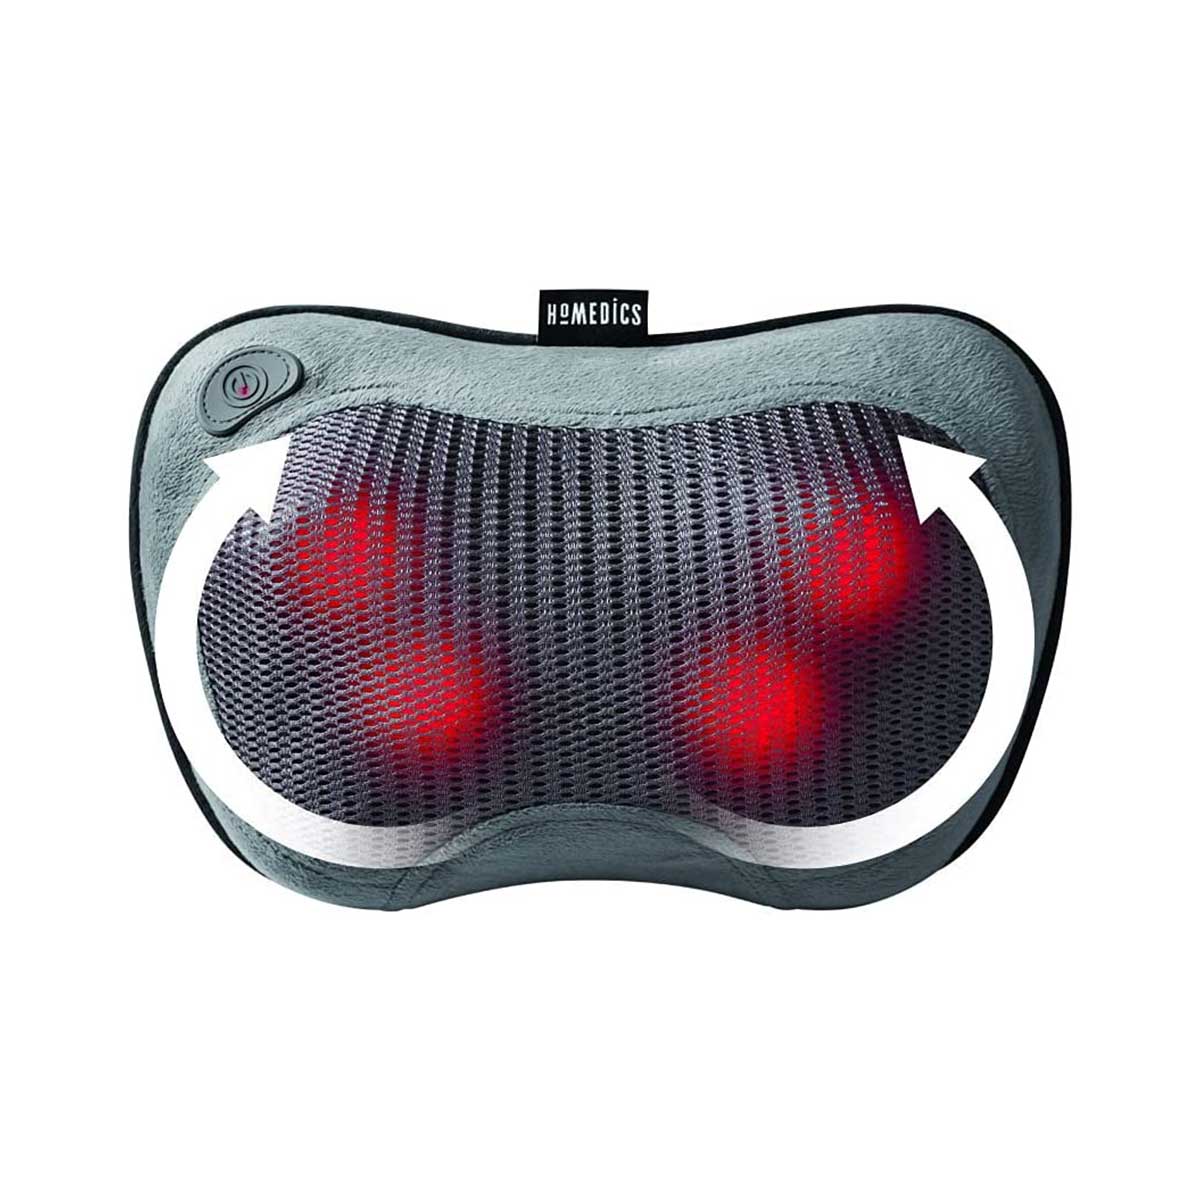 HoMedics - Cordless Shiatsu All-Body Massage Pillow with Soothing Heat, Reverse Function, Rechargeable Battery, and Integrated Controls, Lightweight